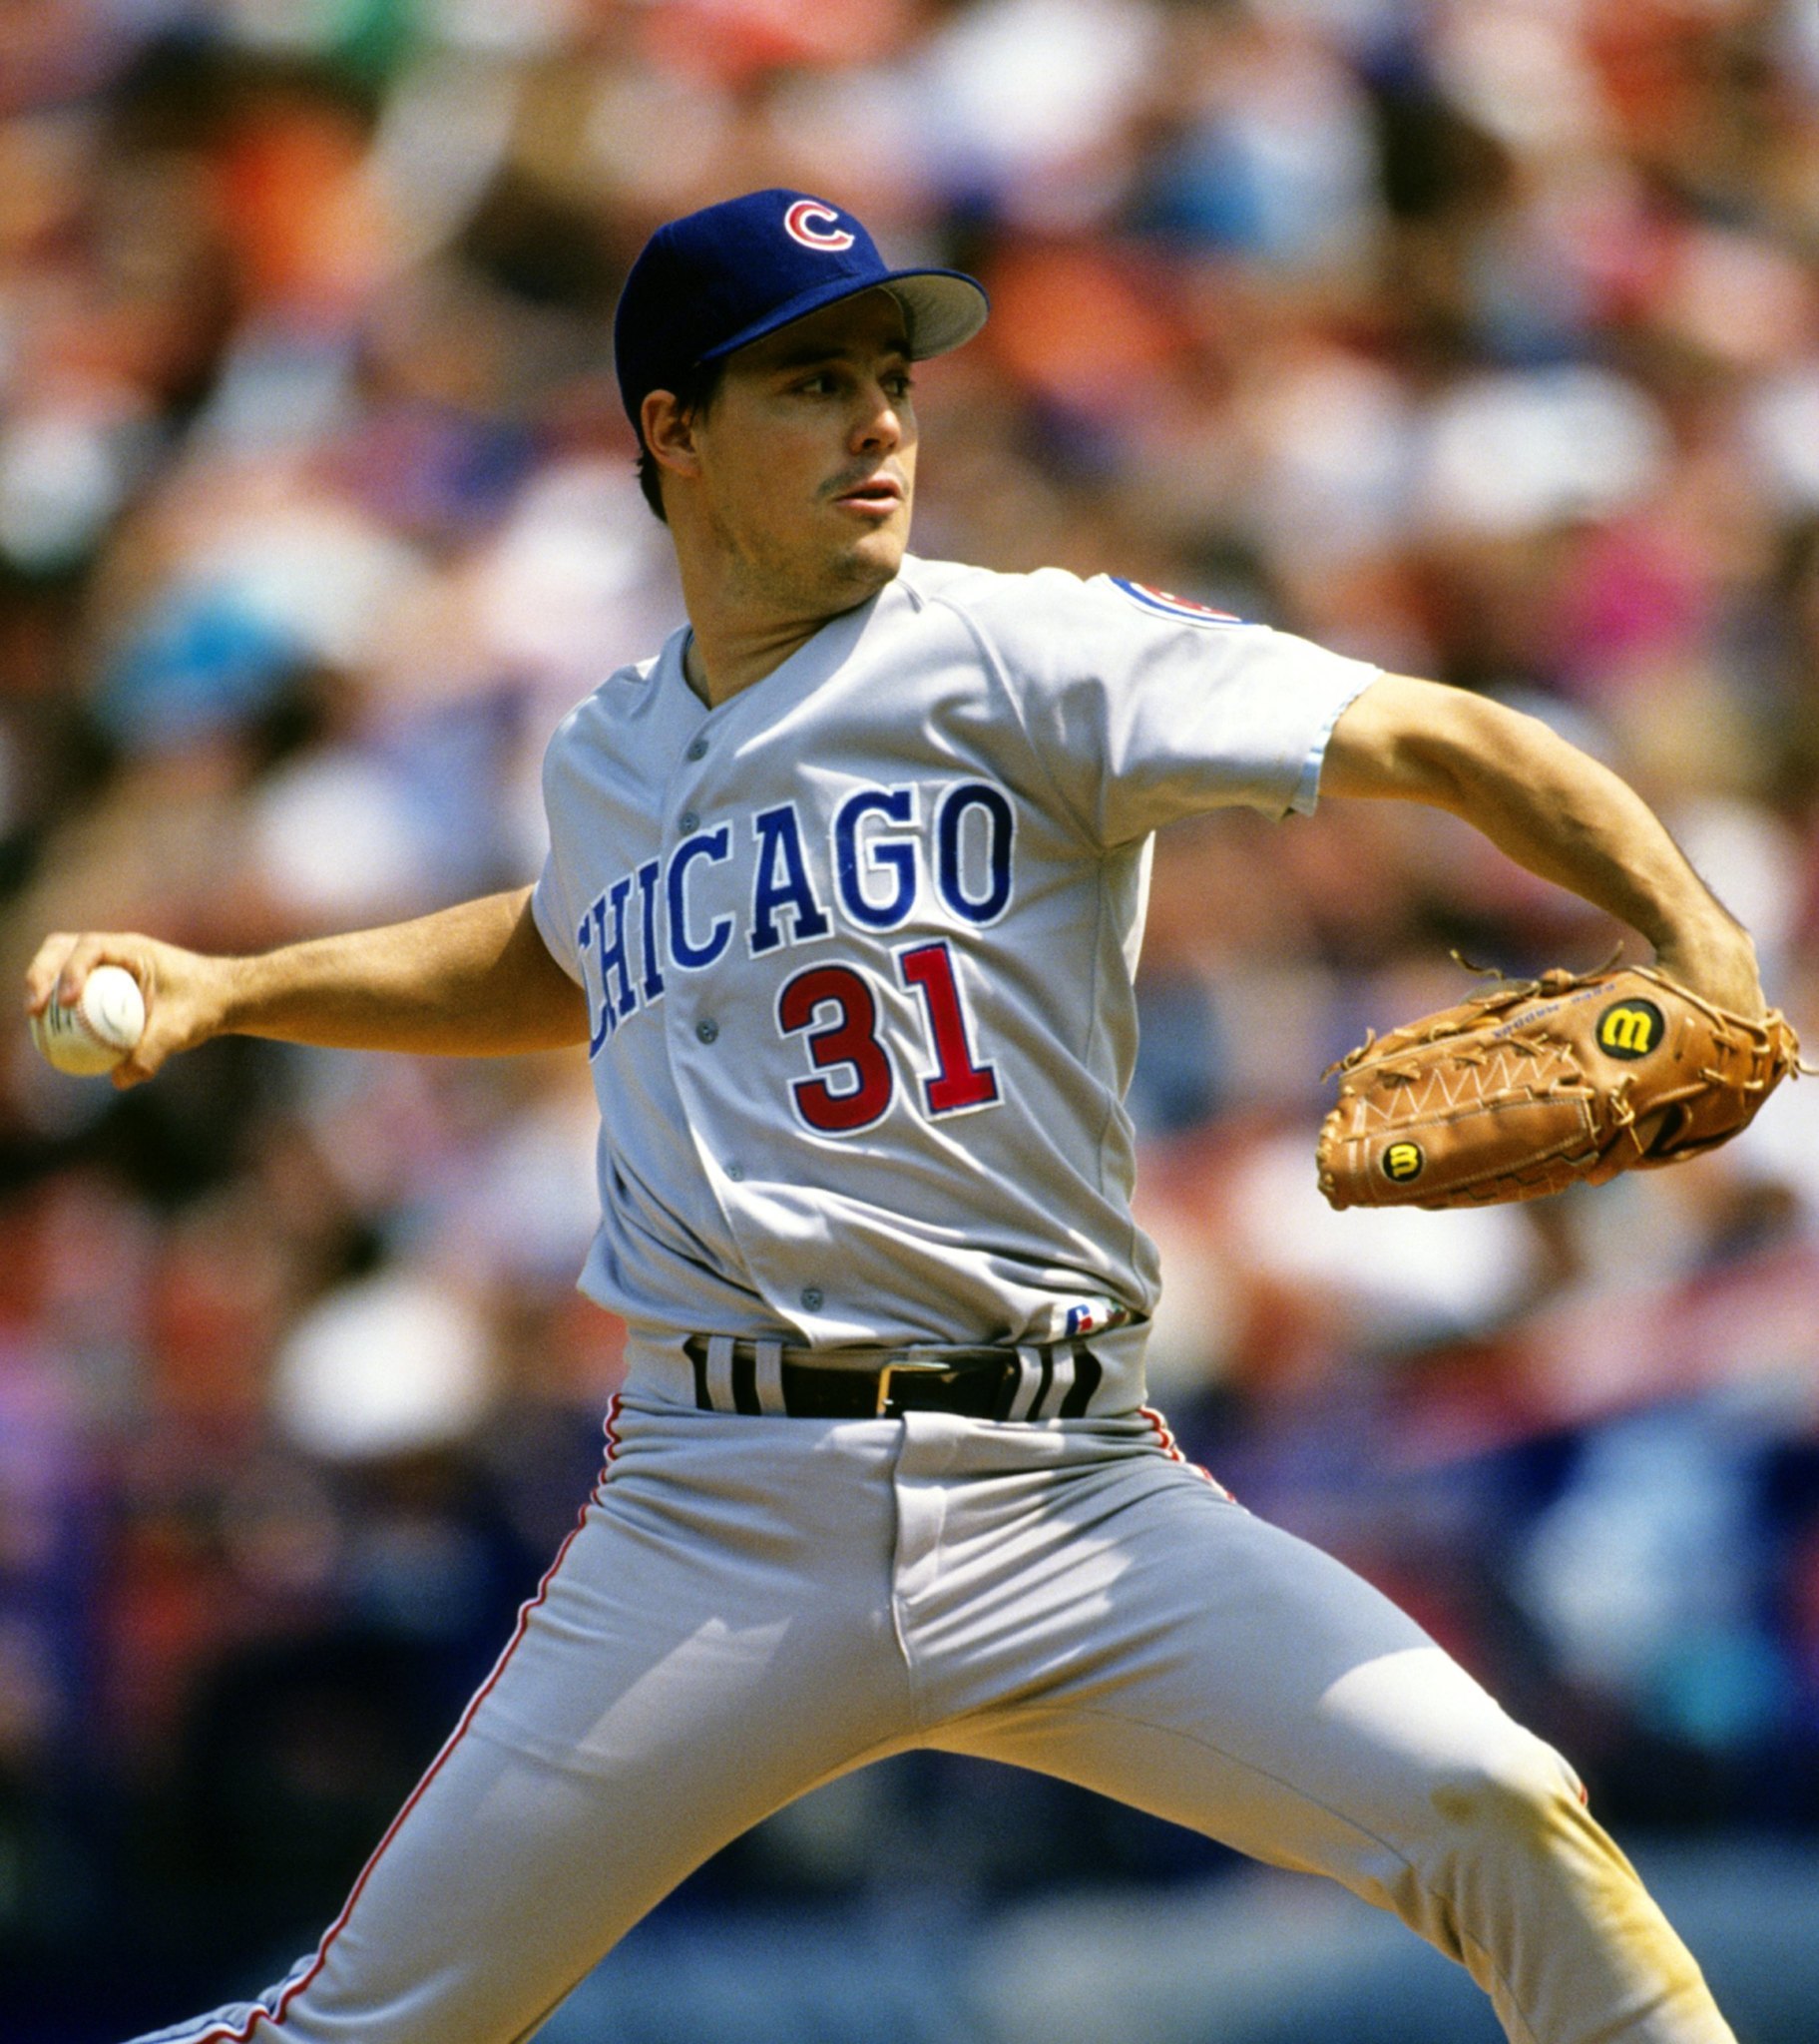 As a Cub, Greg Maddux a character with 